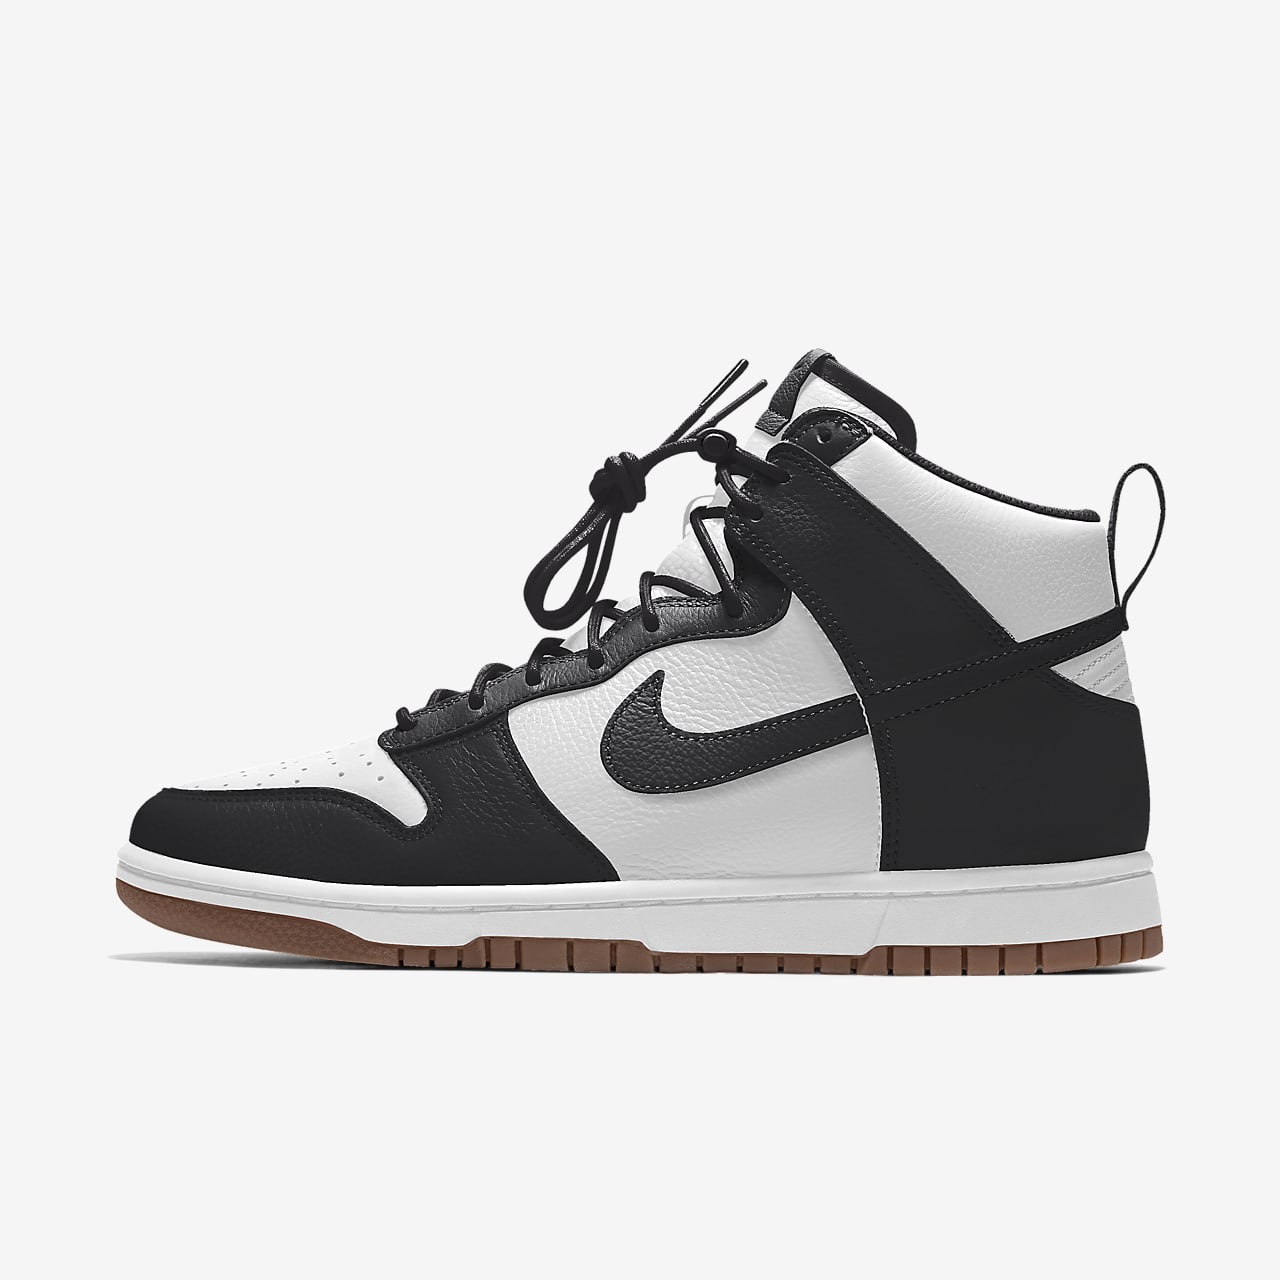 Scarpa personalizzabile Nike Dunk High By You – Uomo